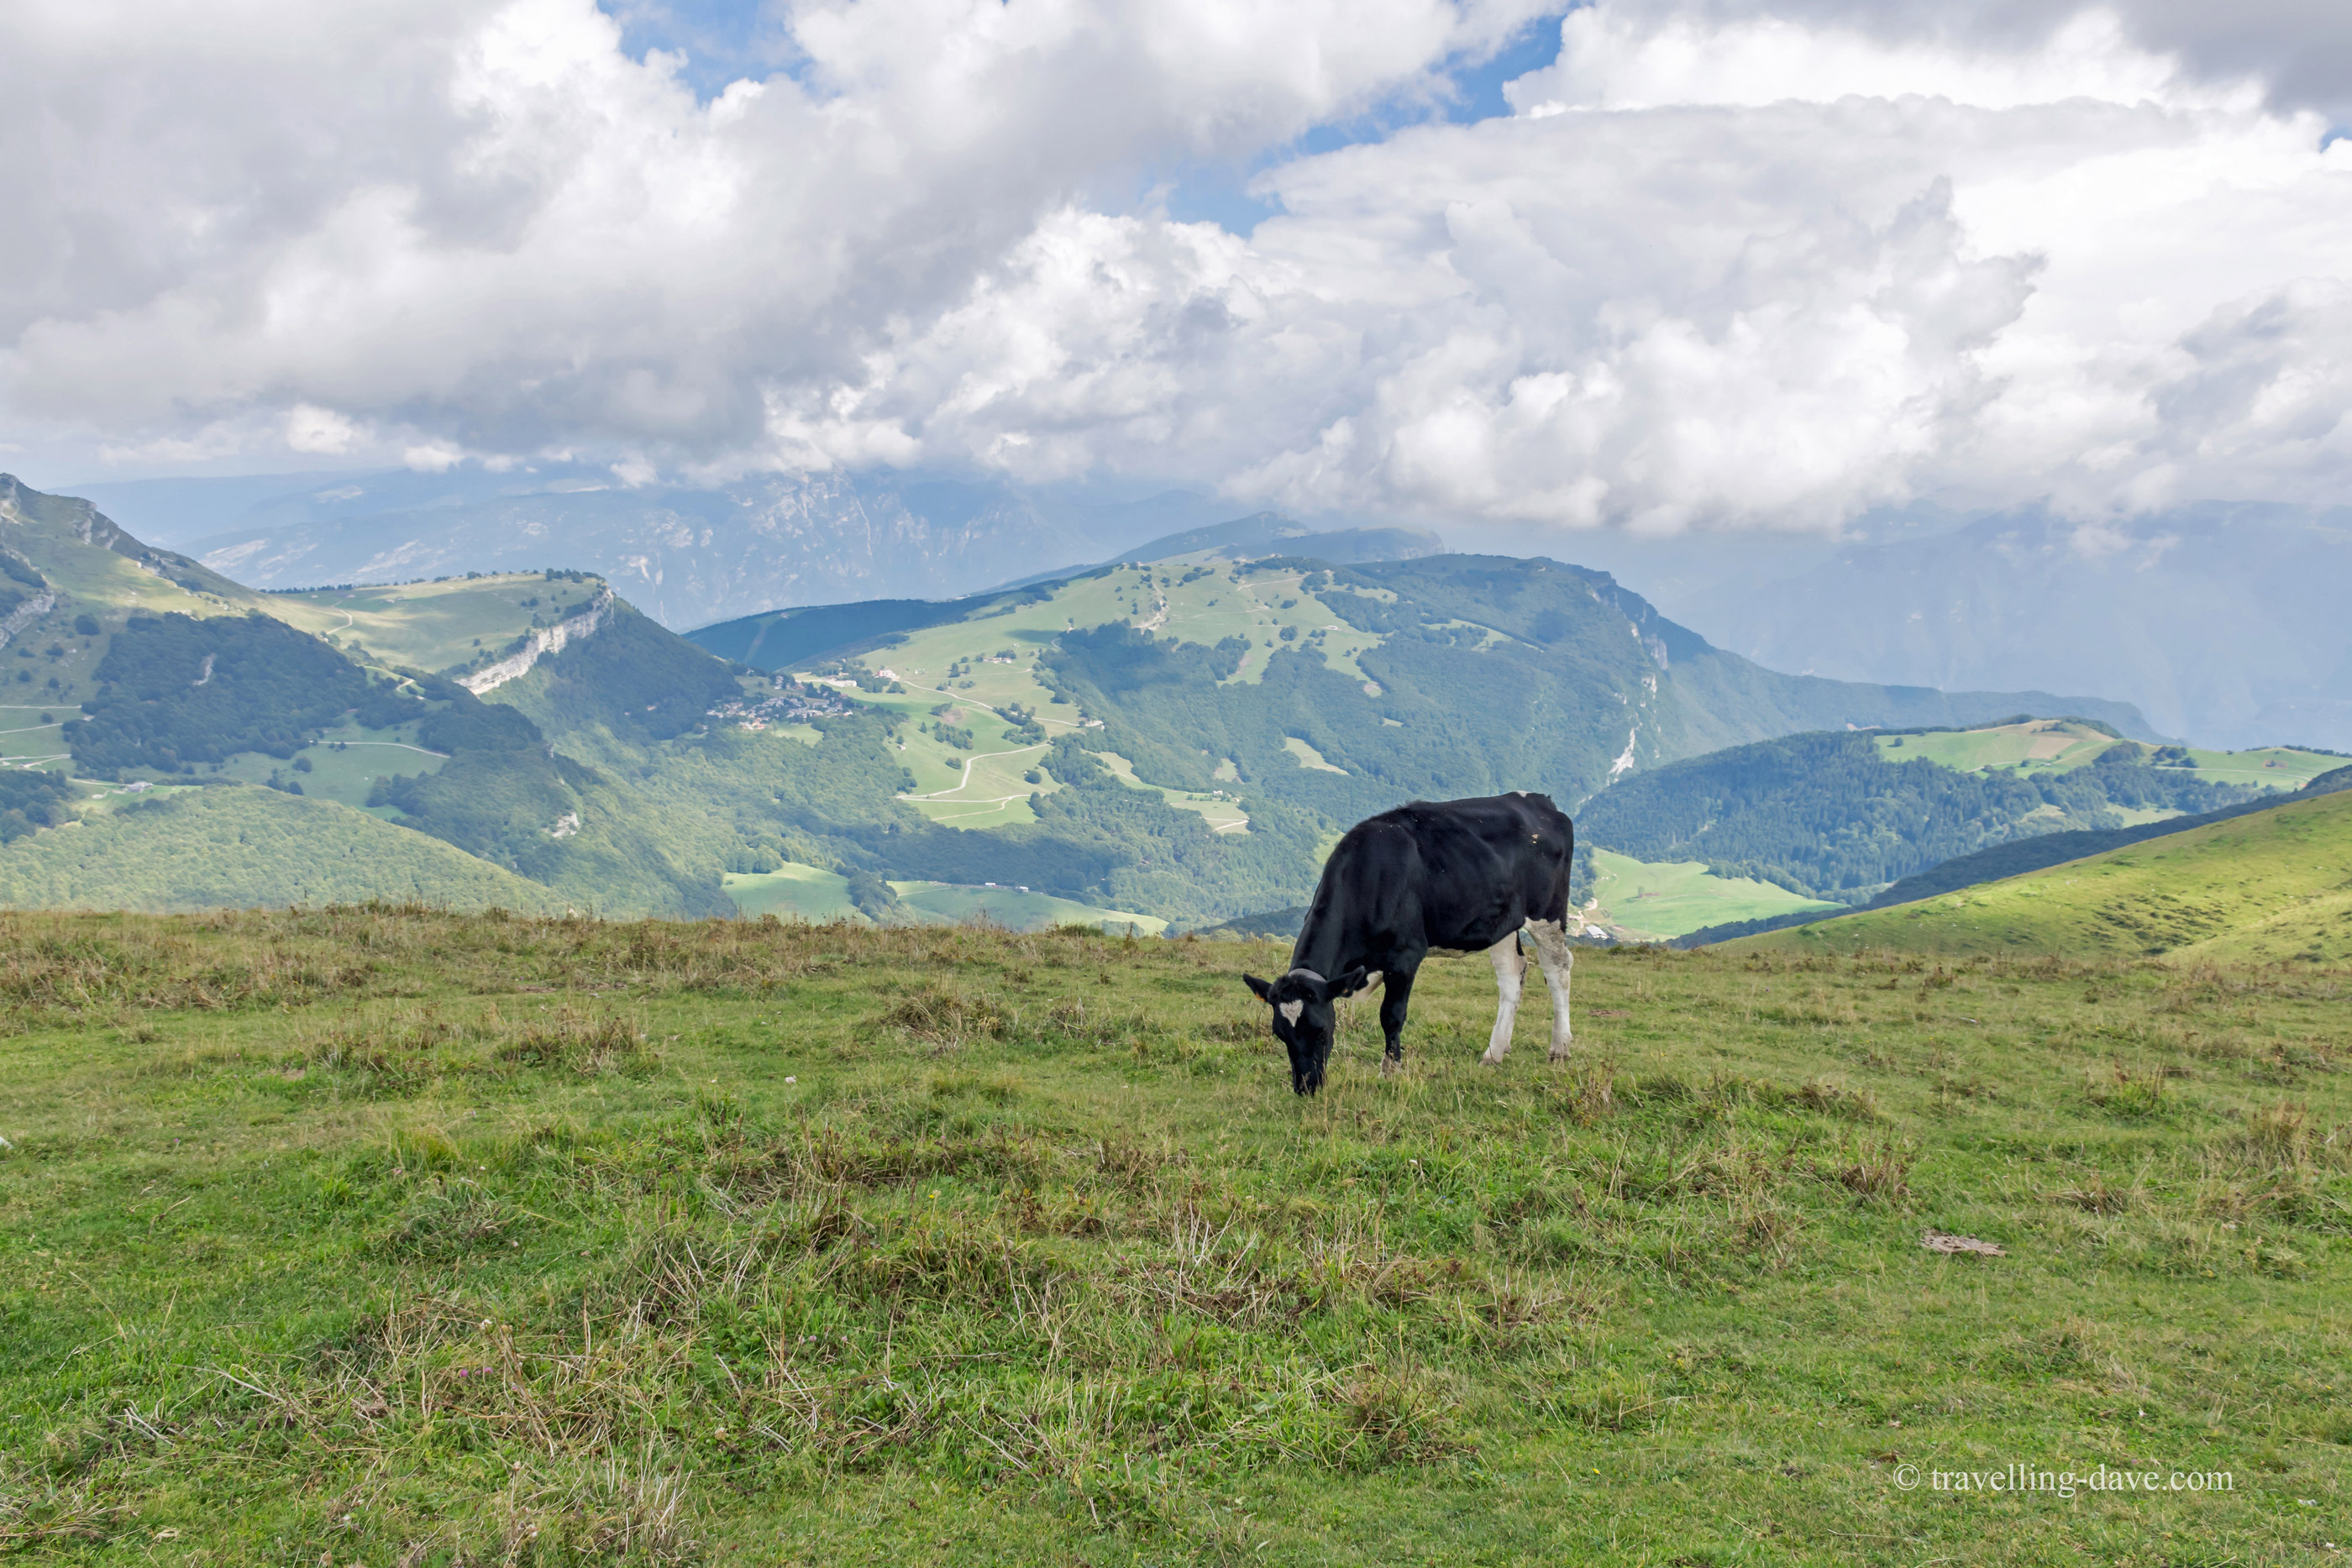 Alpine landscape and cow in Italy